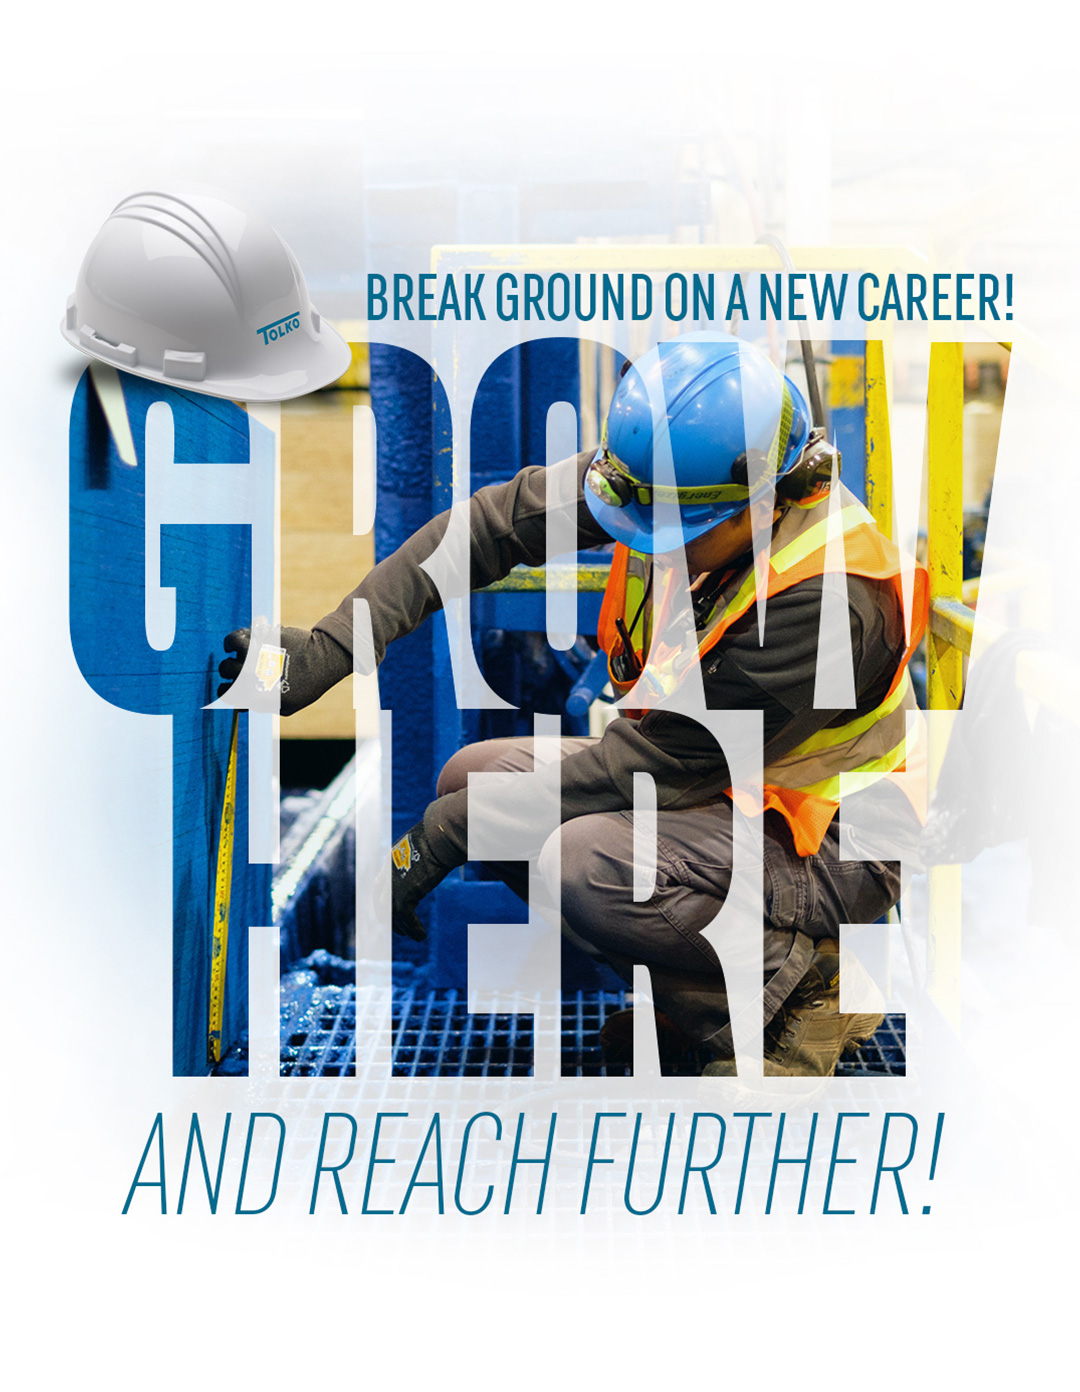 Break ground on a new career! Grow here and reach further!